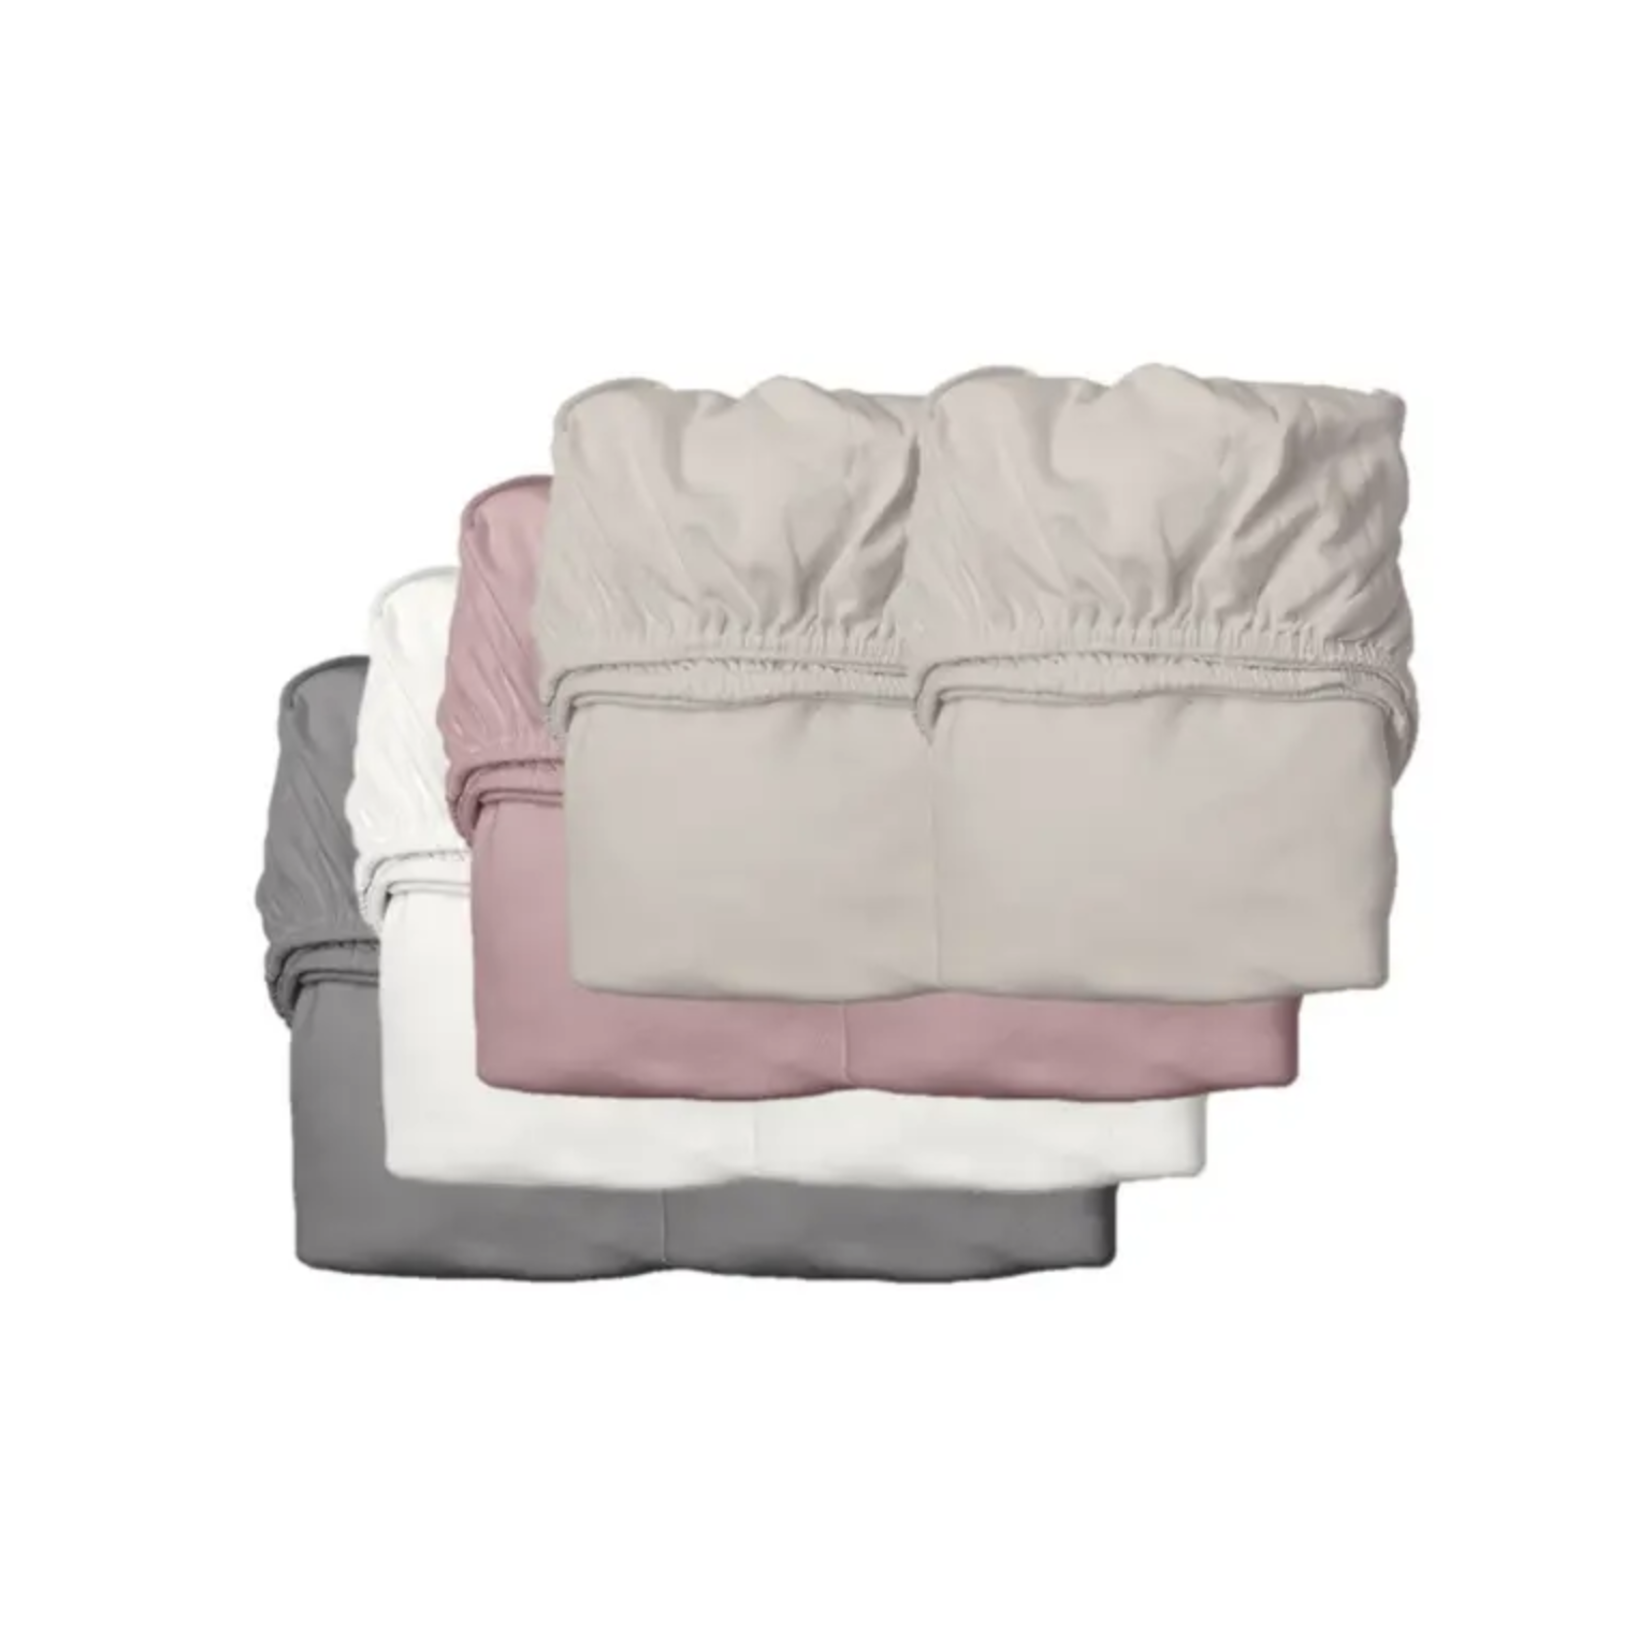 Leander ORGANIC Cot Sheets -Dusty Rose